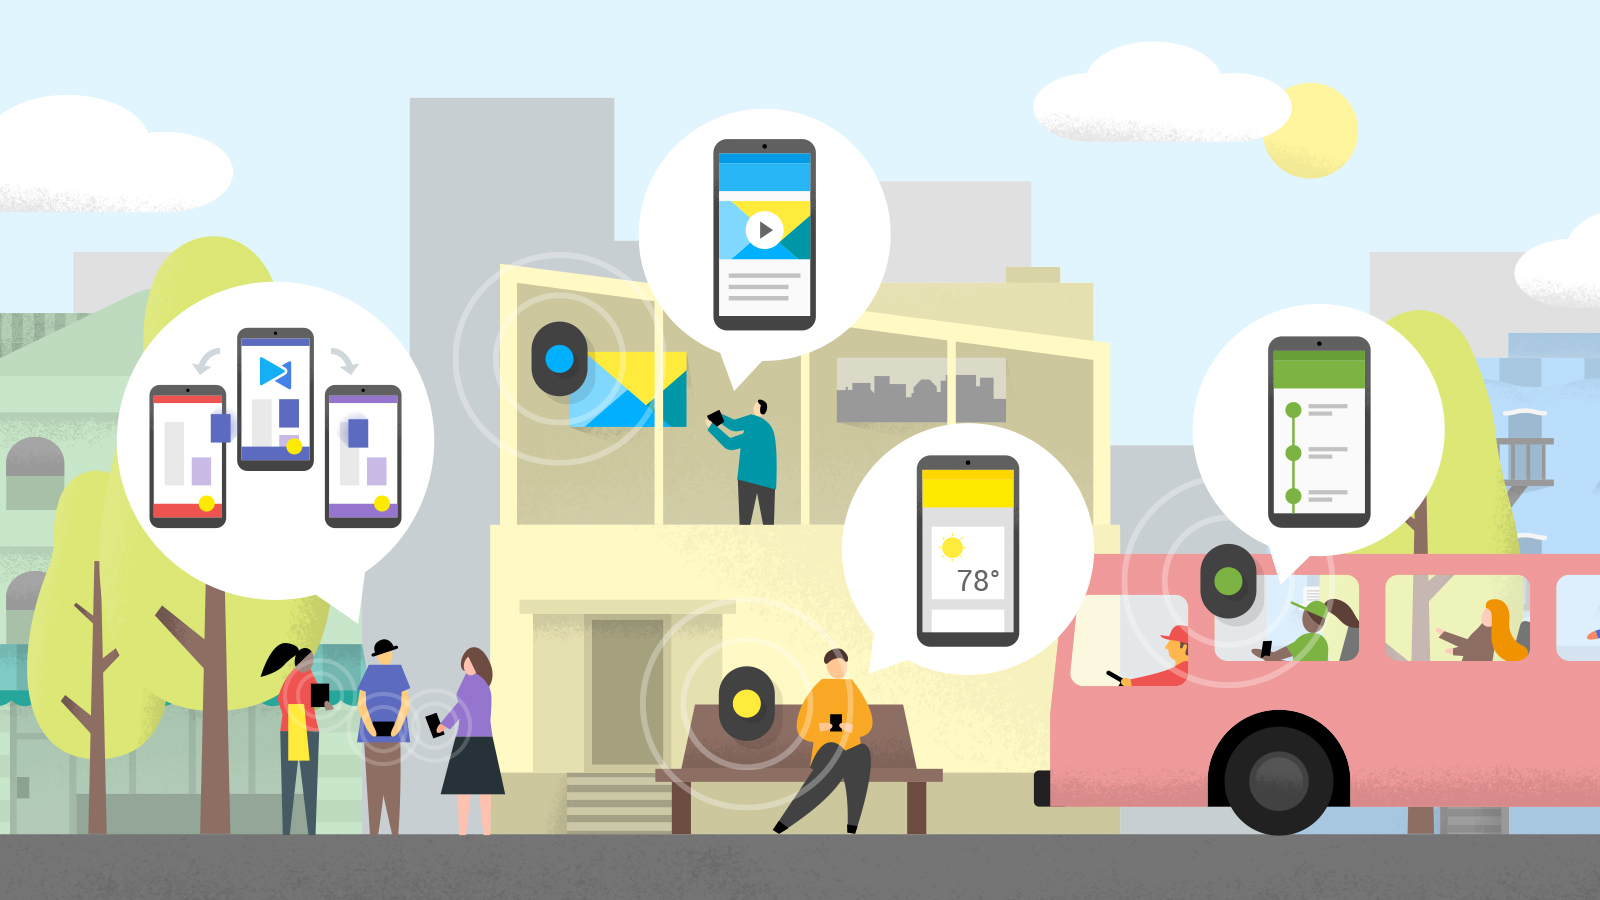 Google Eddystone Opens Incredible New Opportunities for Beacons